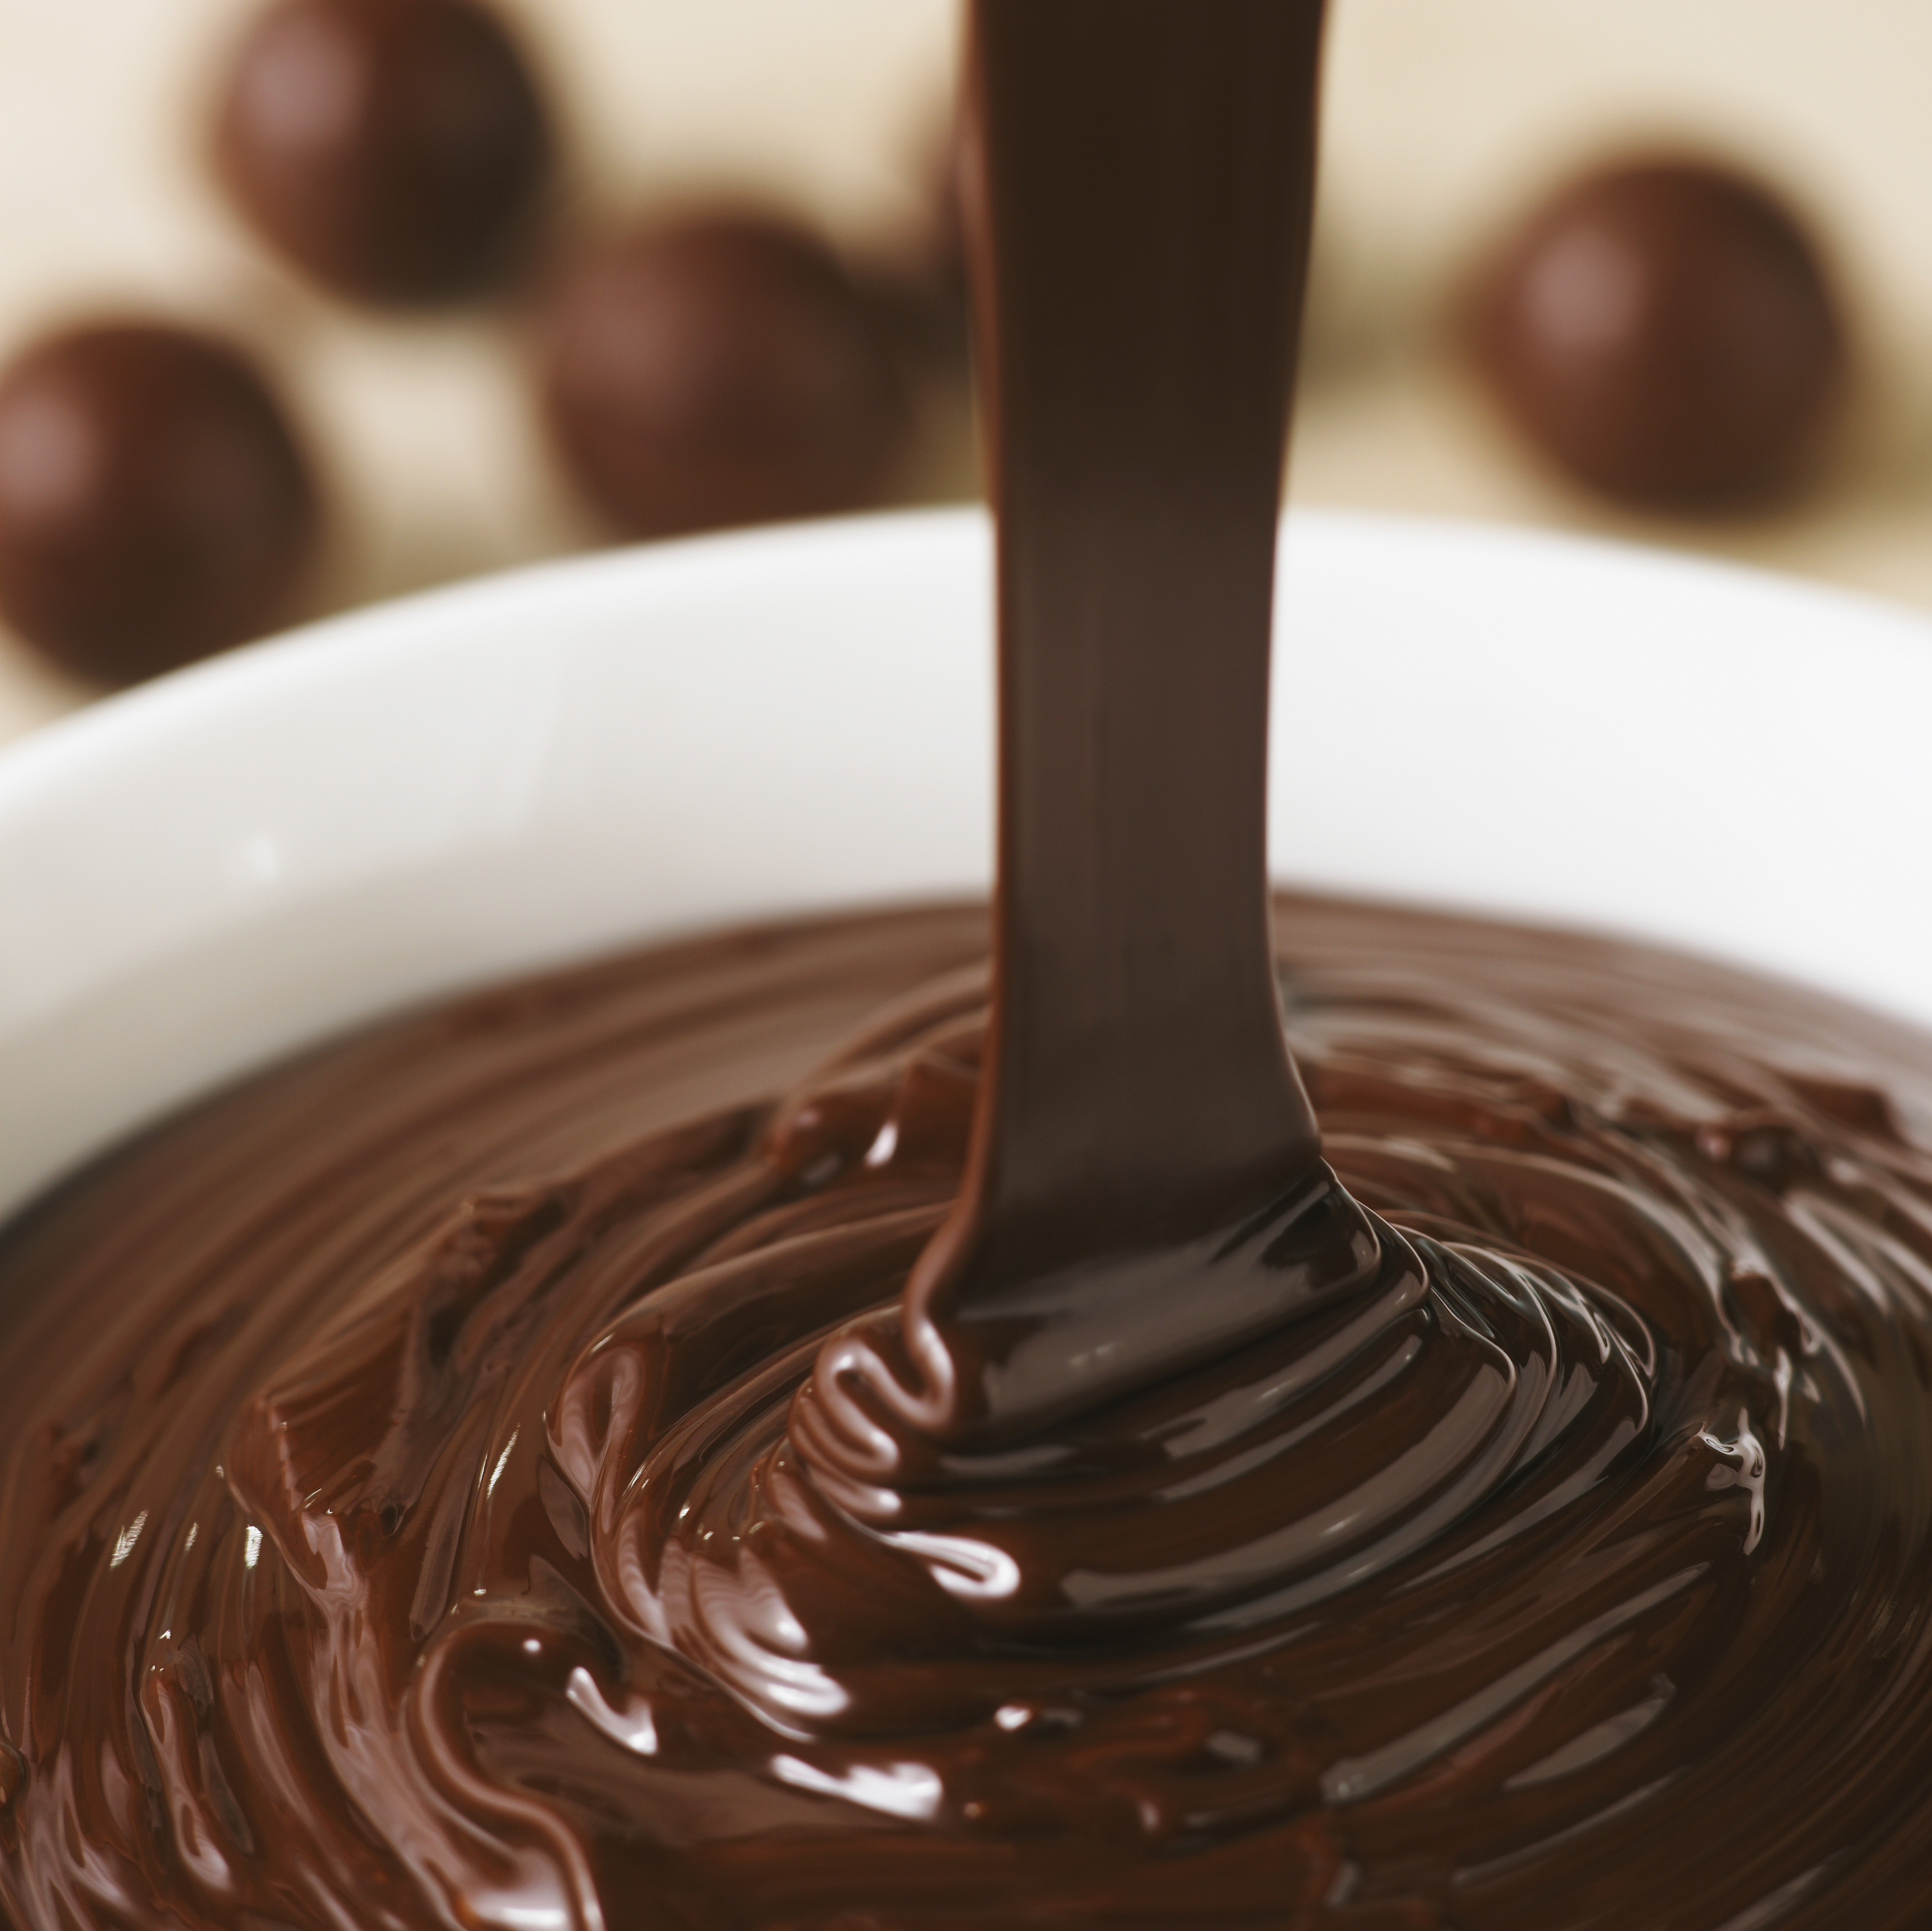 Where Do Hershey's Ingredients Come From